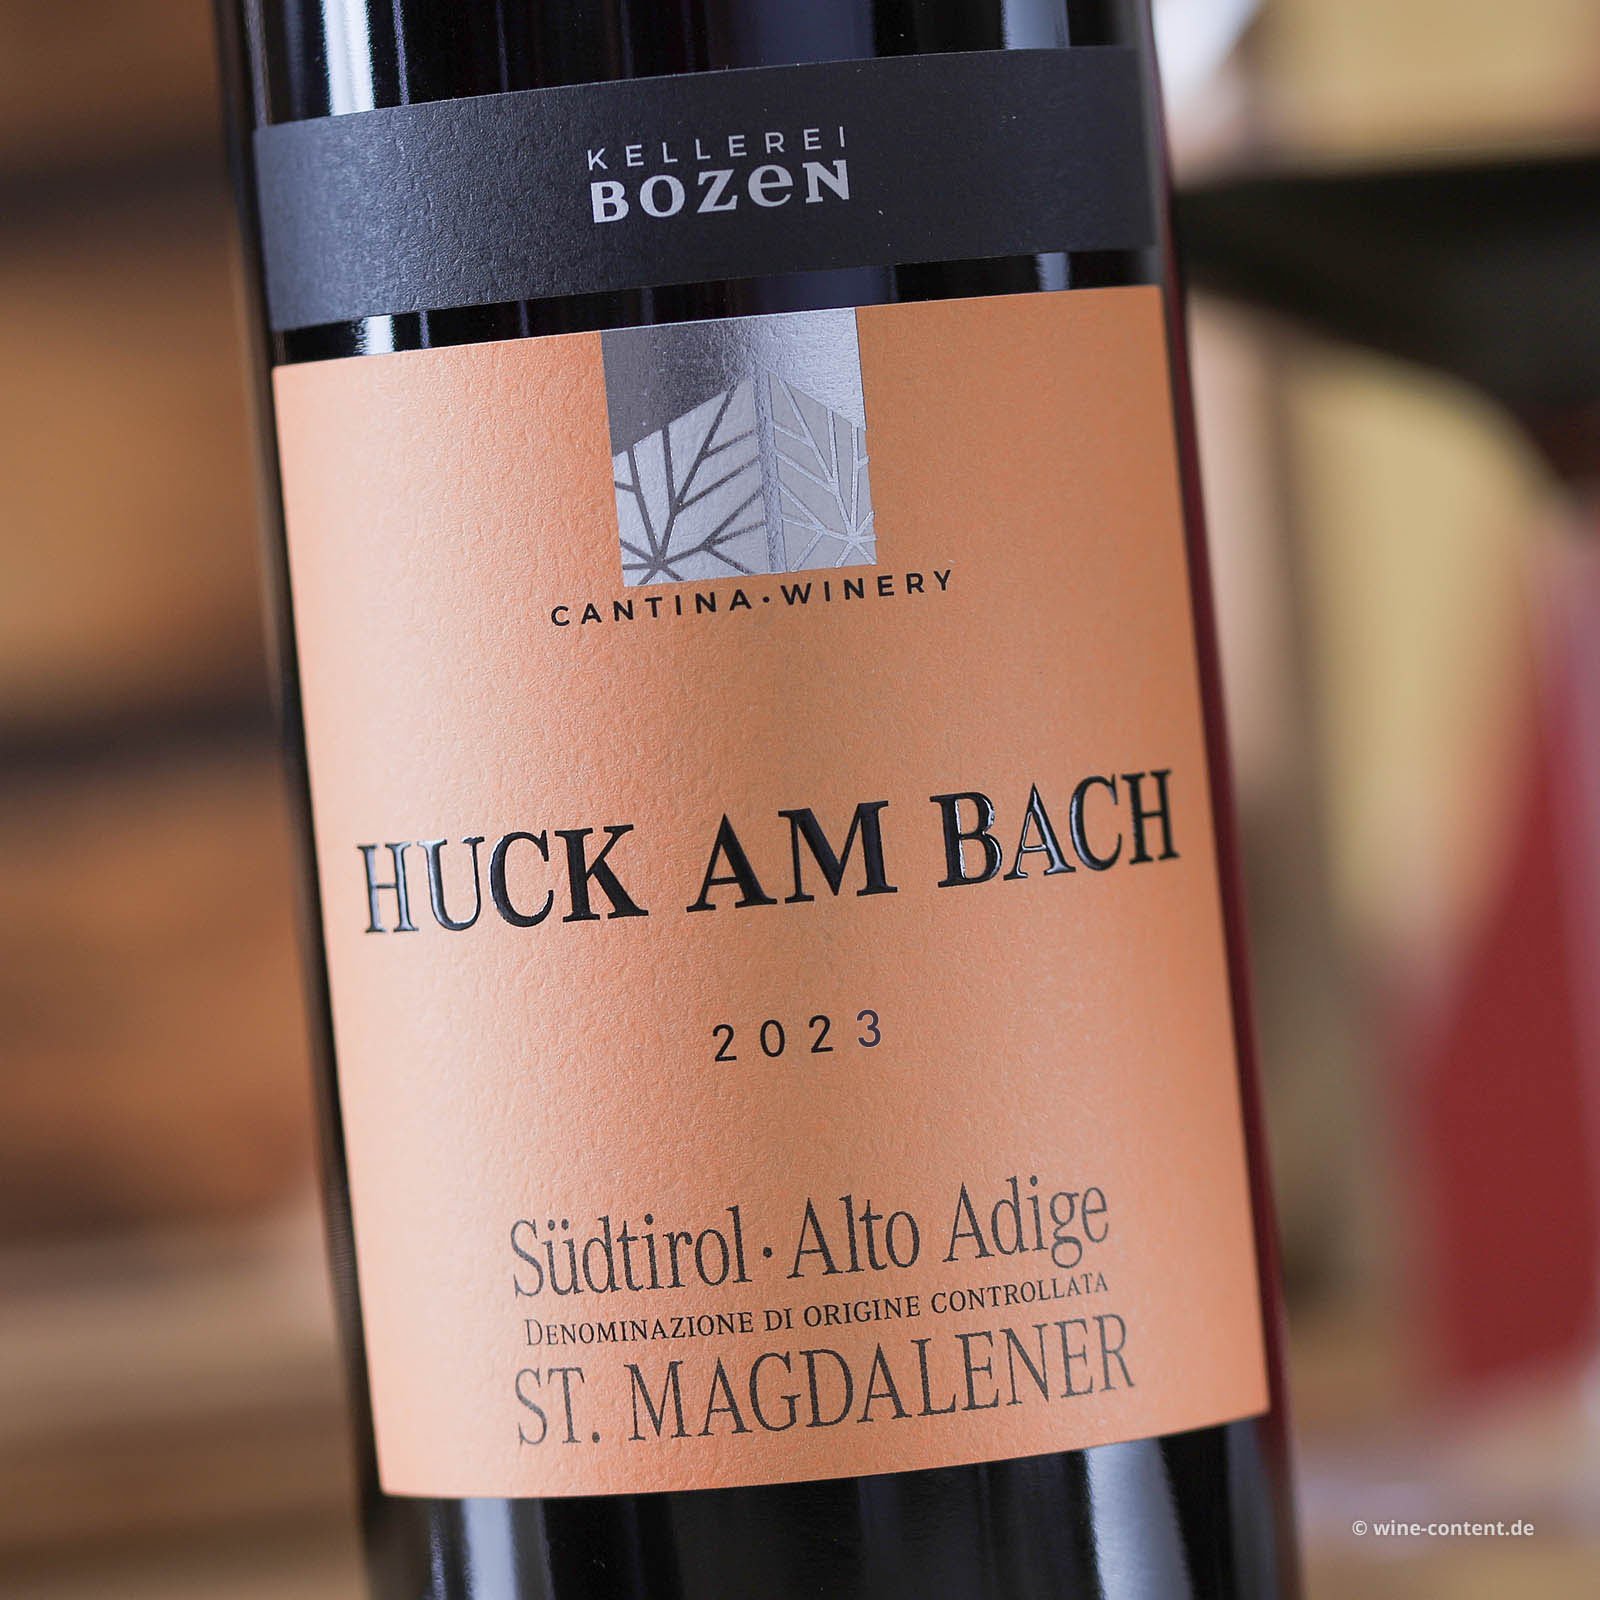 St. Magdalener Classico 2023 Huck am Bach